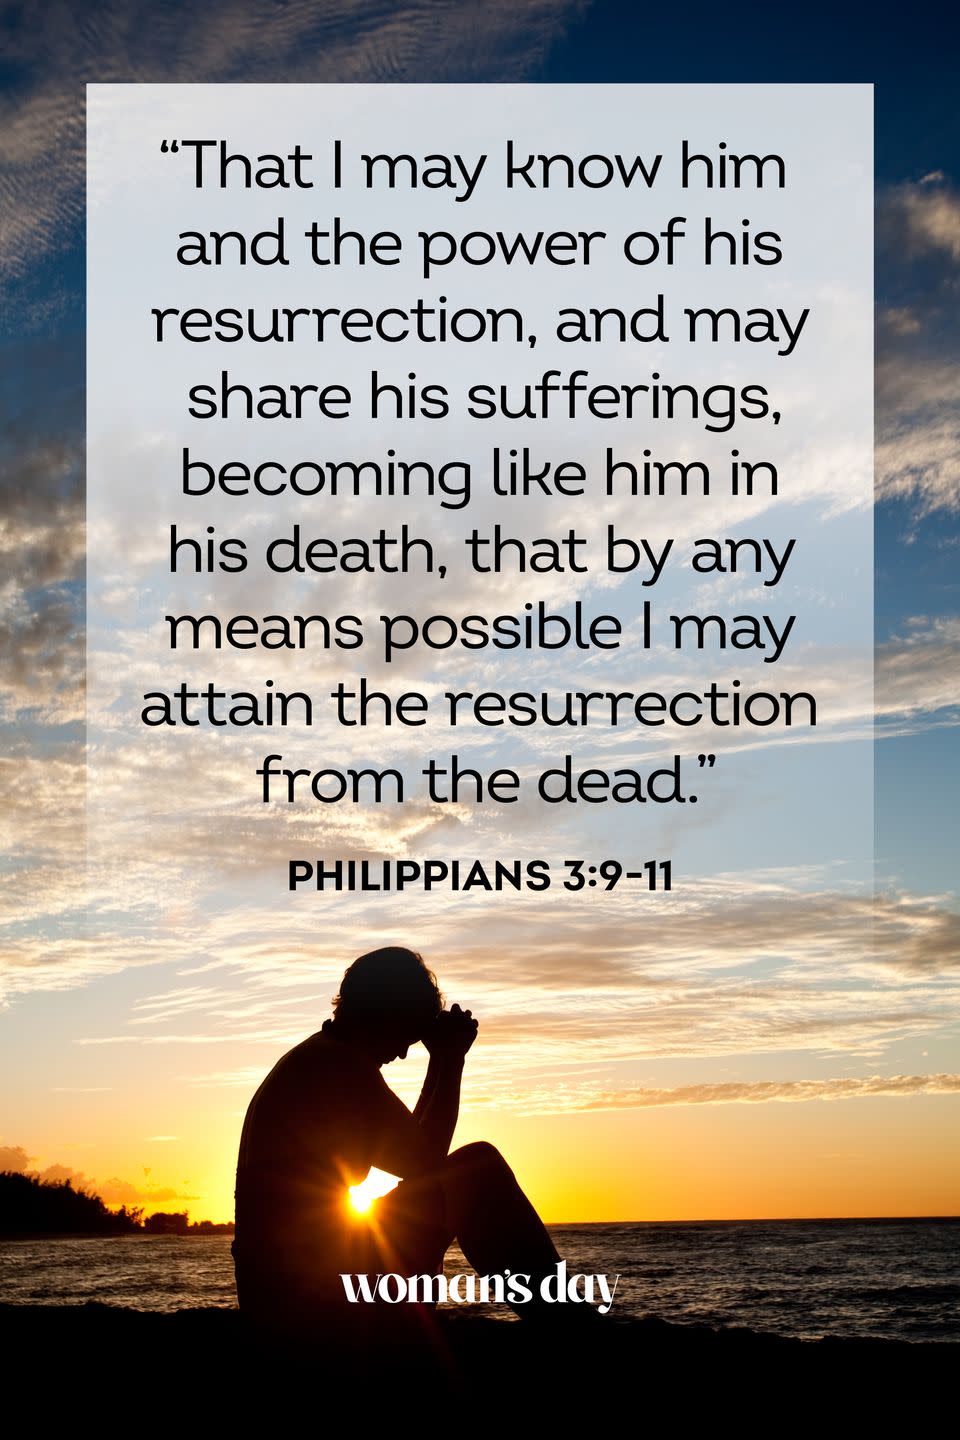 <p>"That I may know him and the power of his resurrection, and may share his sufferings, becoming like him in his death, that by any means possible I may attain the resurrection from the dead."</p>